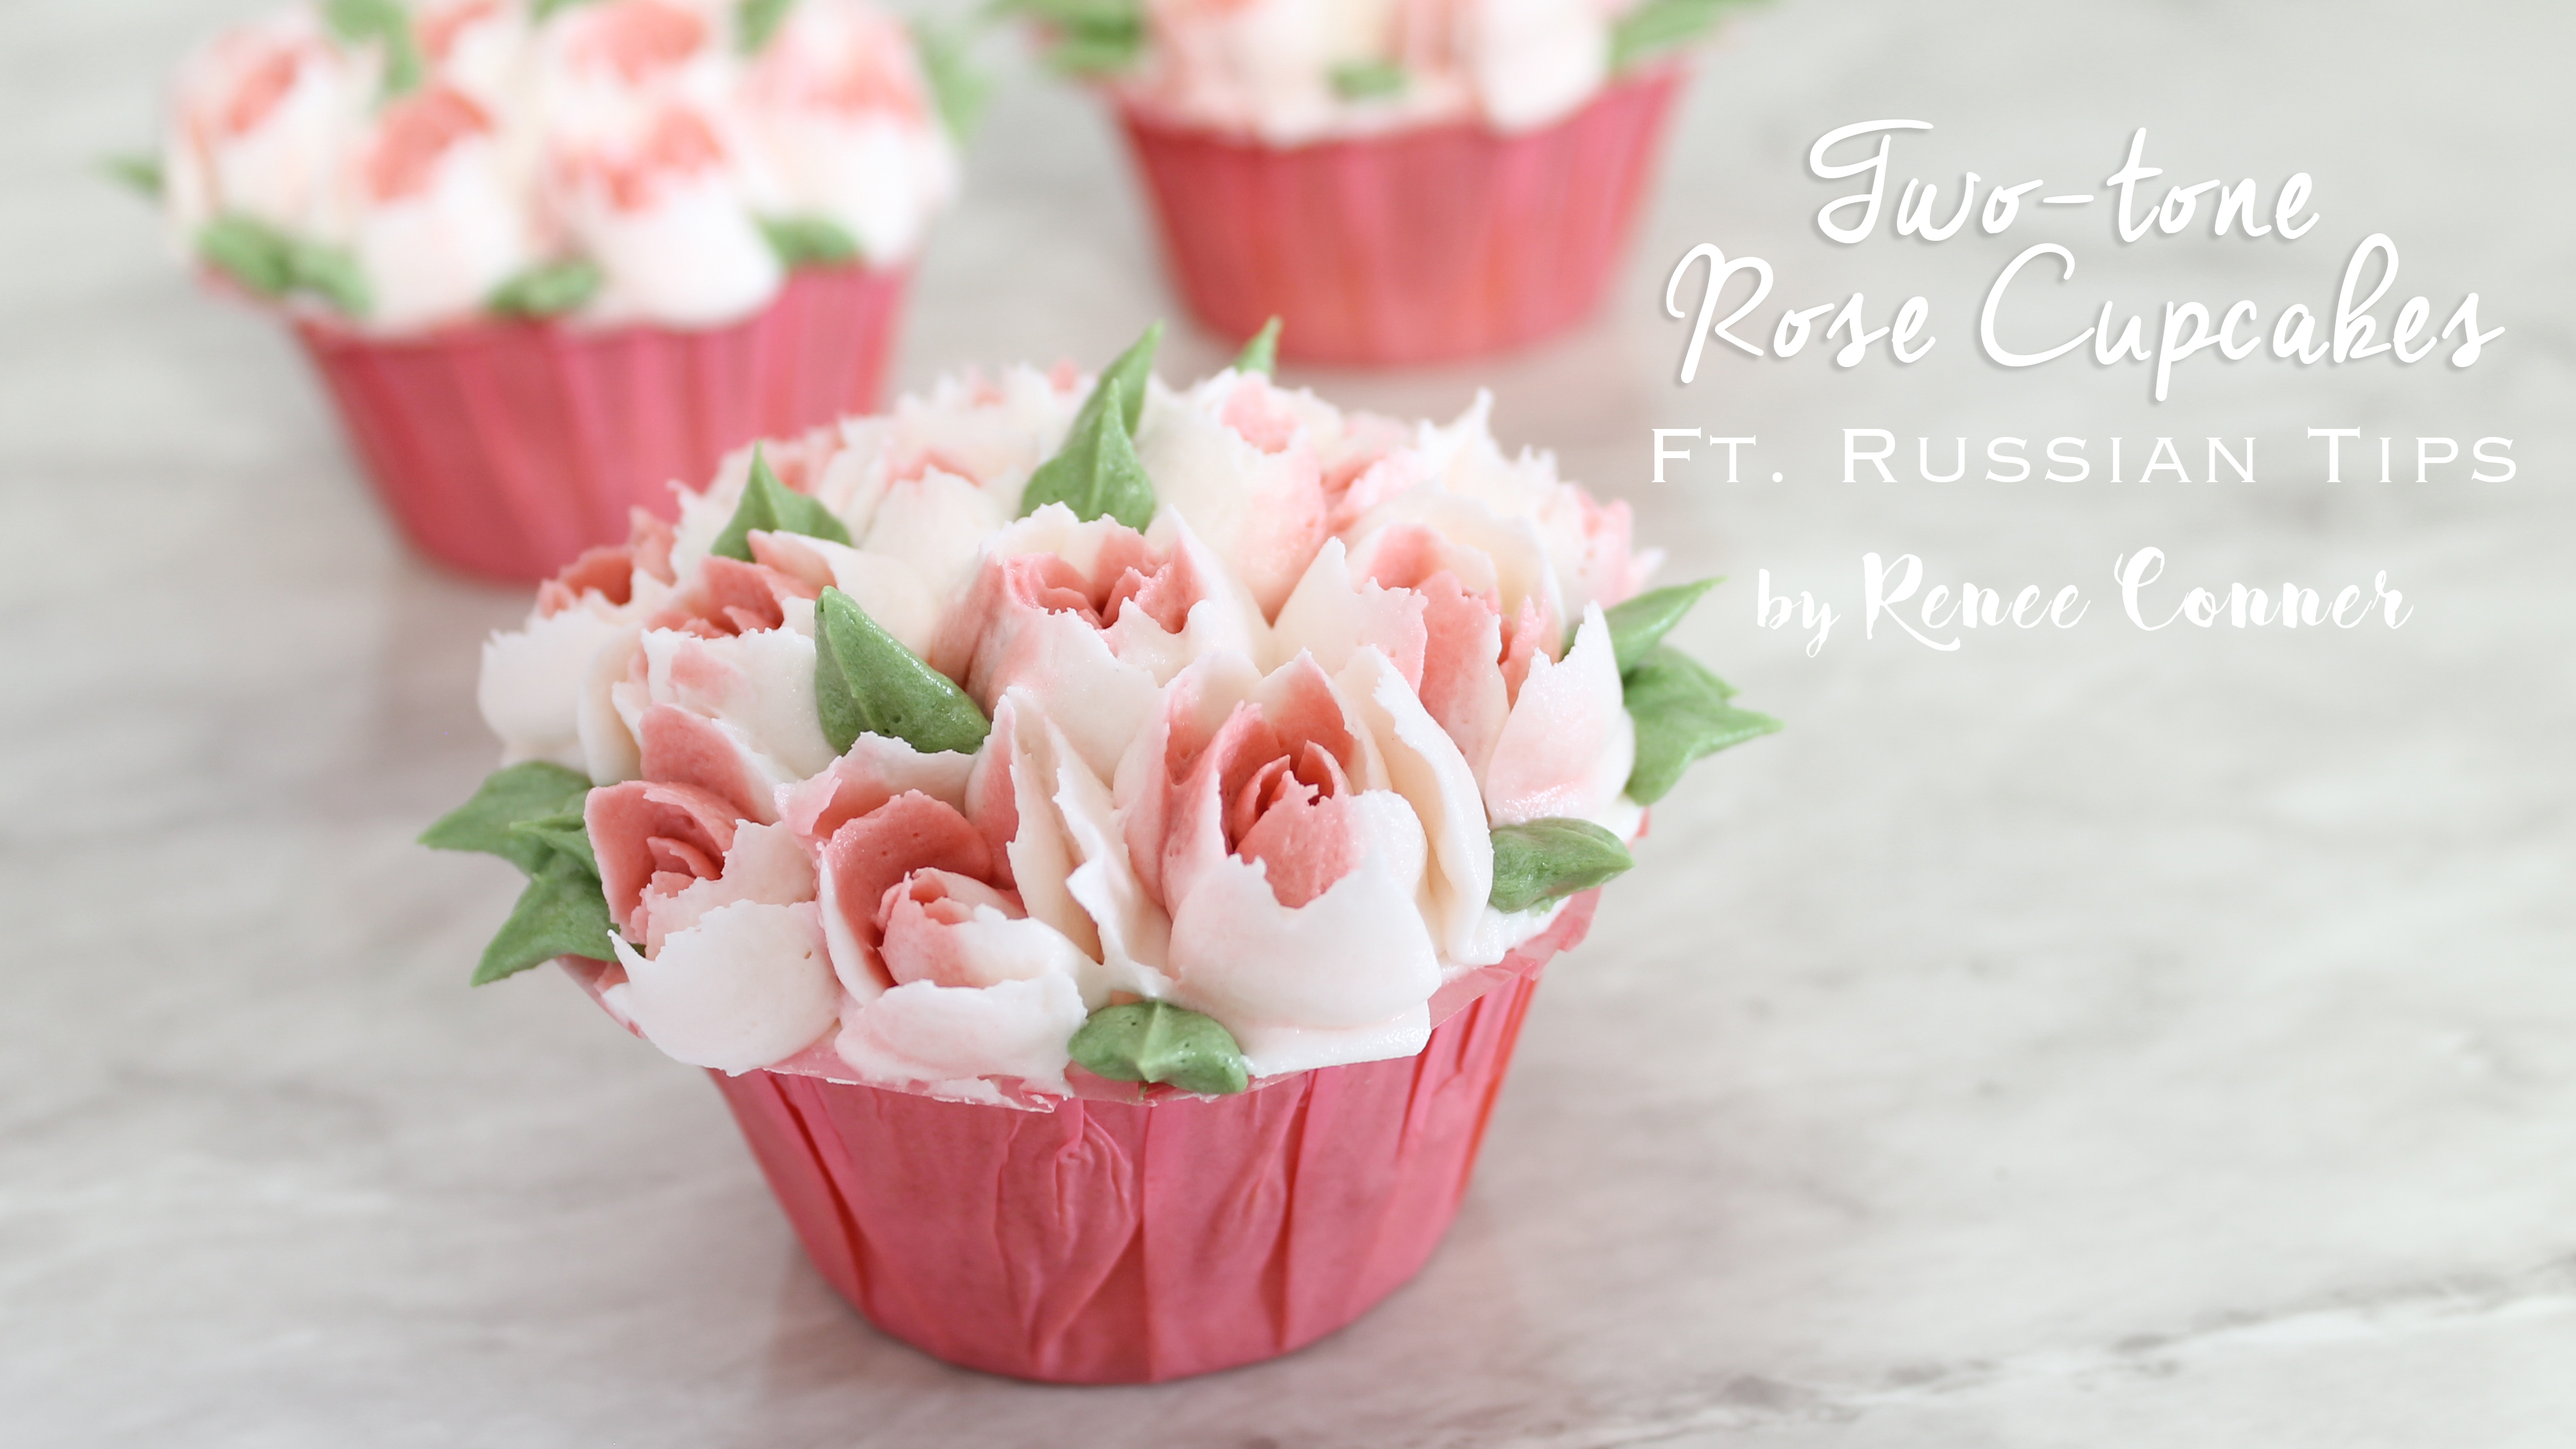 Rose Cupcake ft. Russian Piping Tips